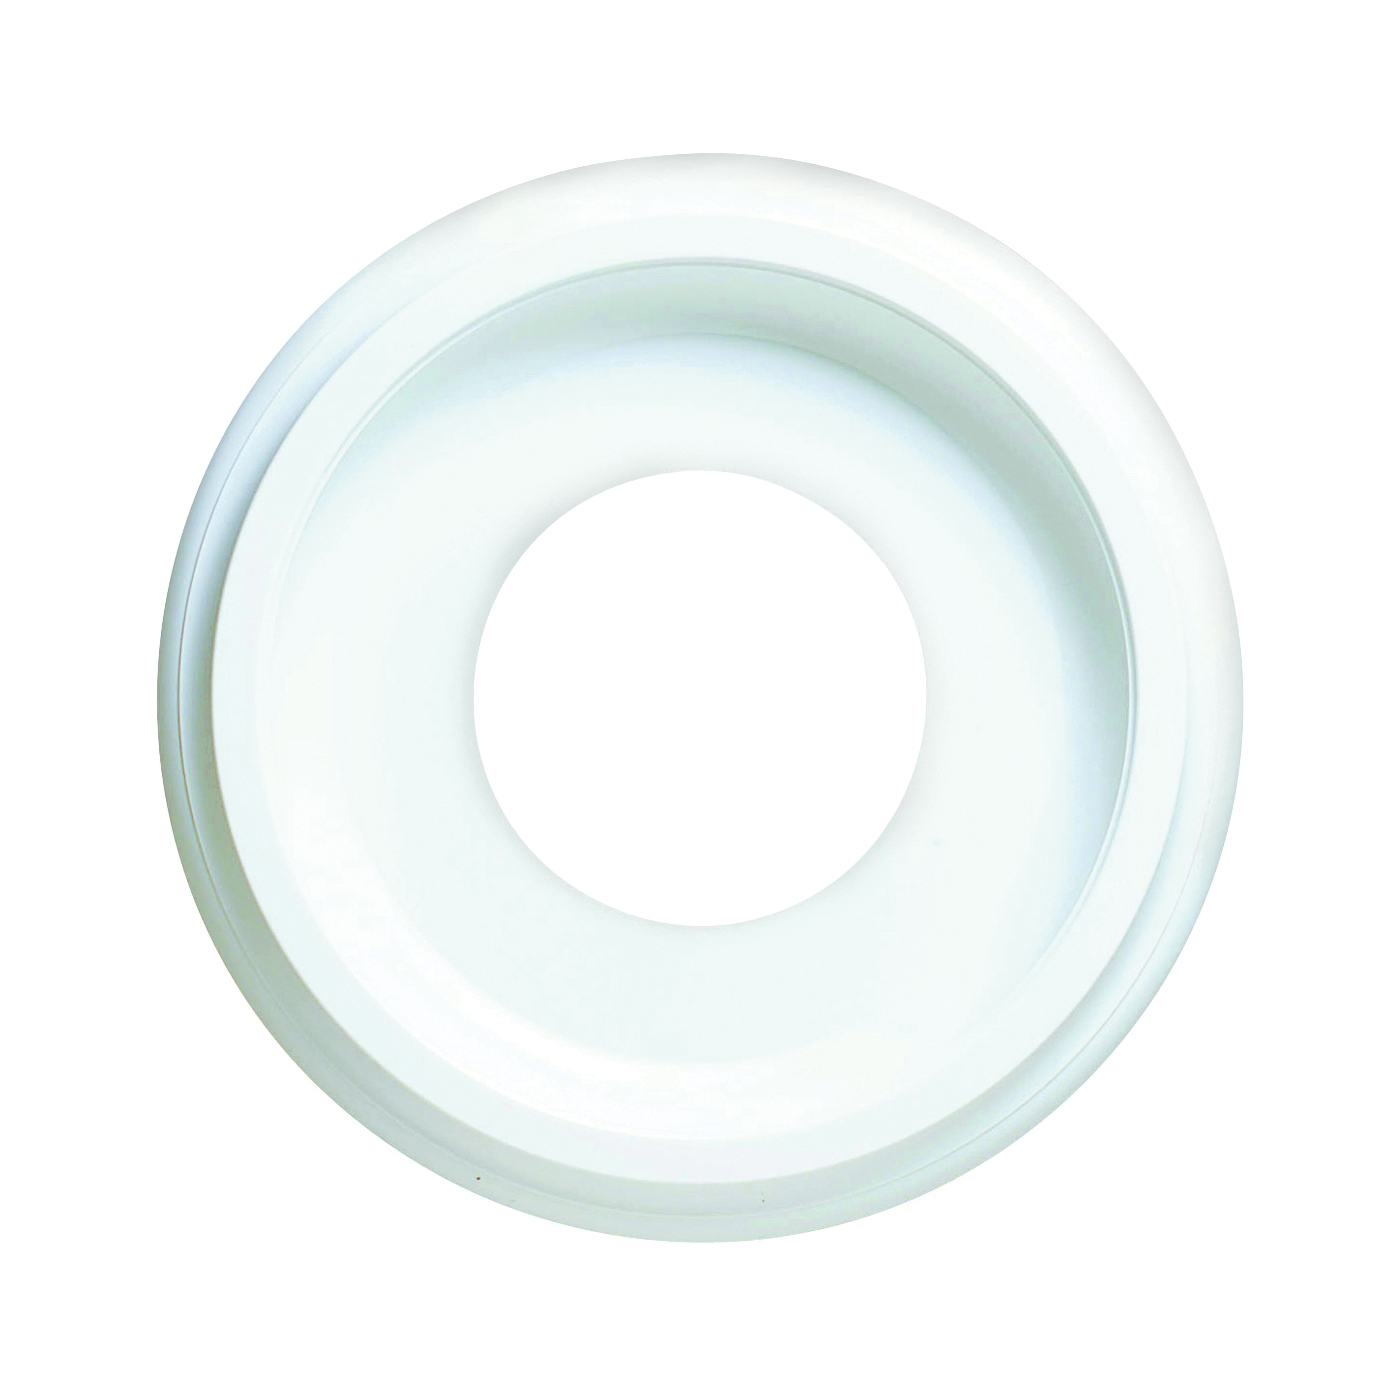 Westinghouse 7703700 Ceiling Medallion, 9-3/4 in Dia, 9-3/4 in L, Plastic, White, For: Ceiling Fans, Lighting Fixtures - 1